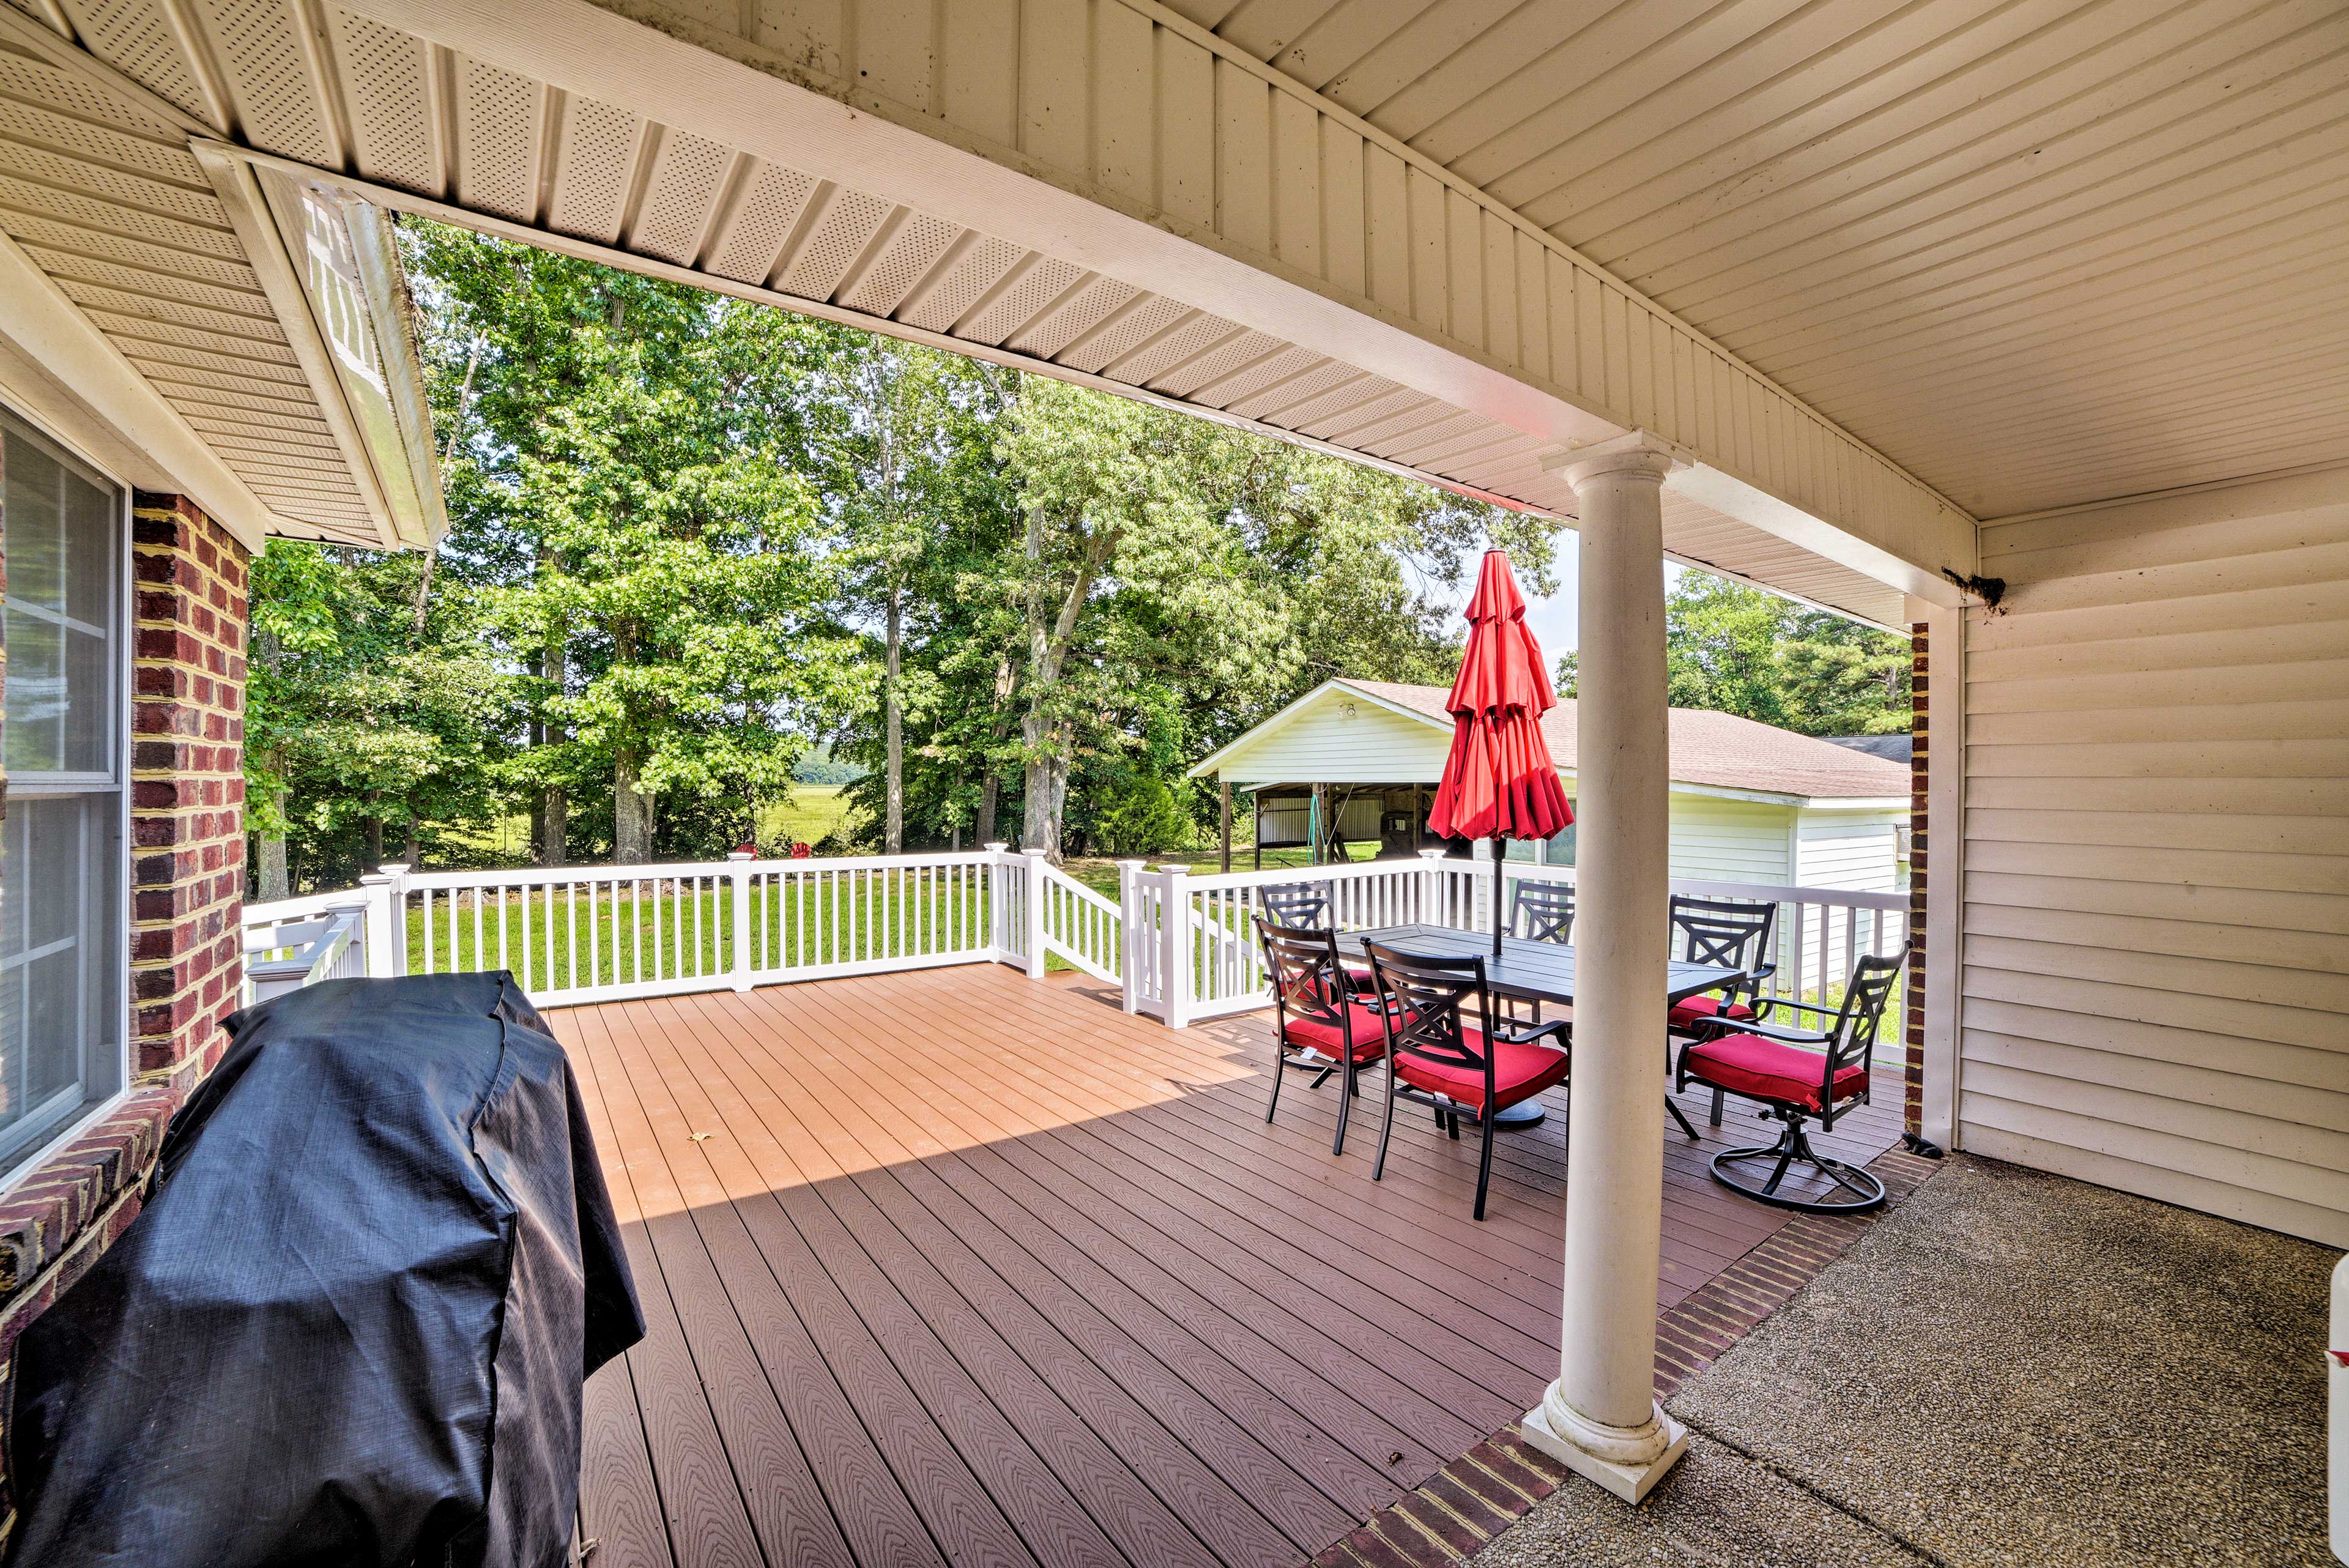 The deck offers open-air and shaded options.